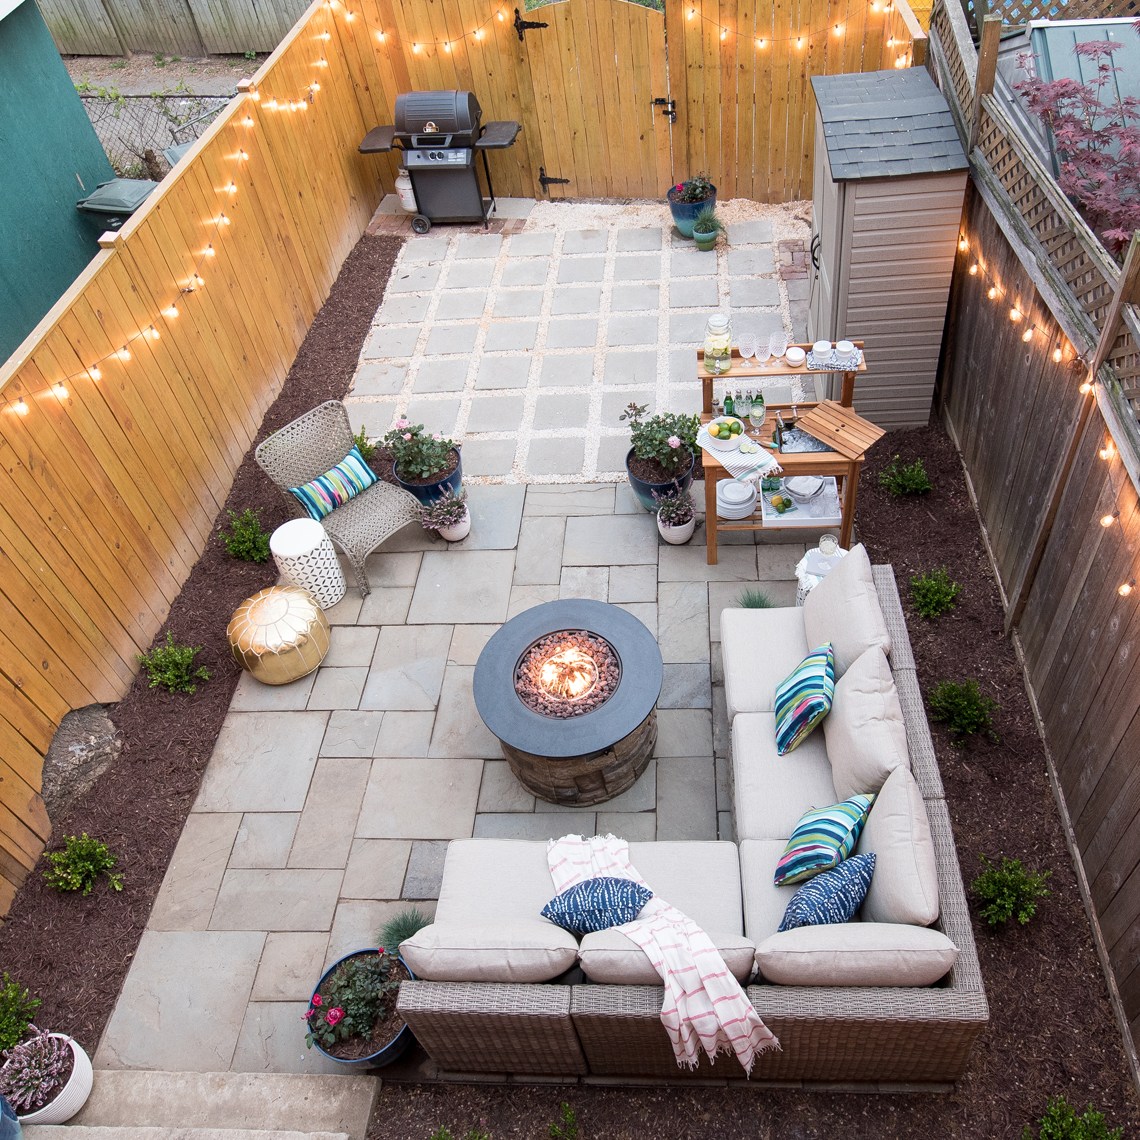 Inspiring Outdoor Fire Pit Areas, Small Patio With Fire Pit